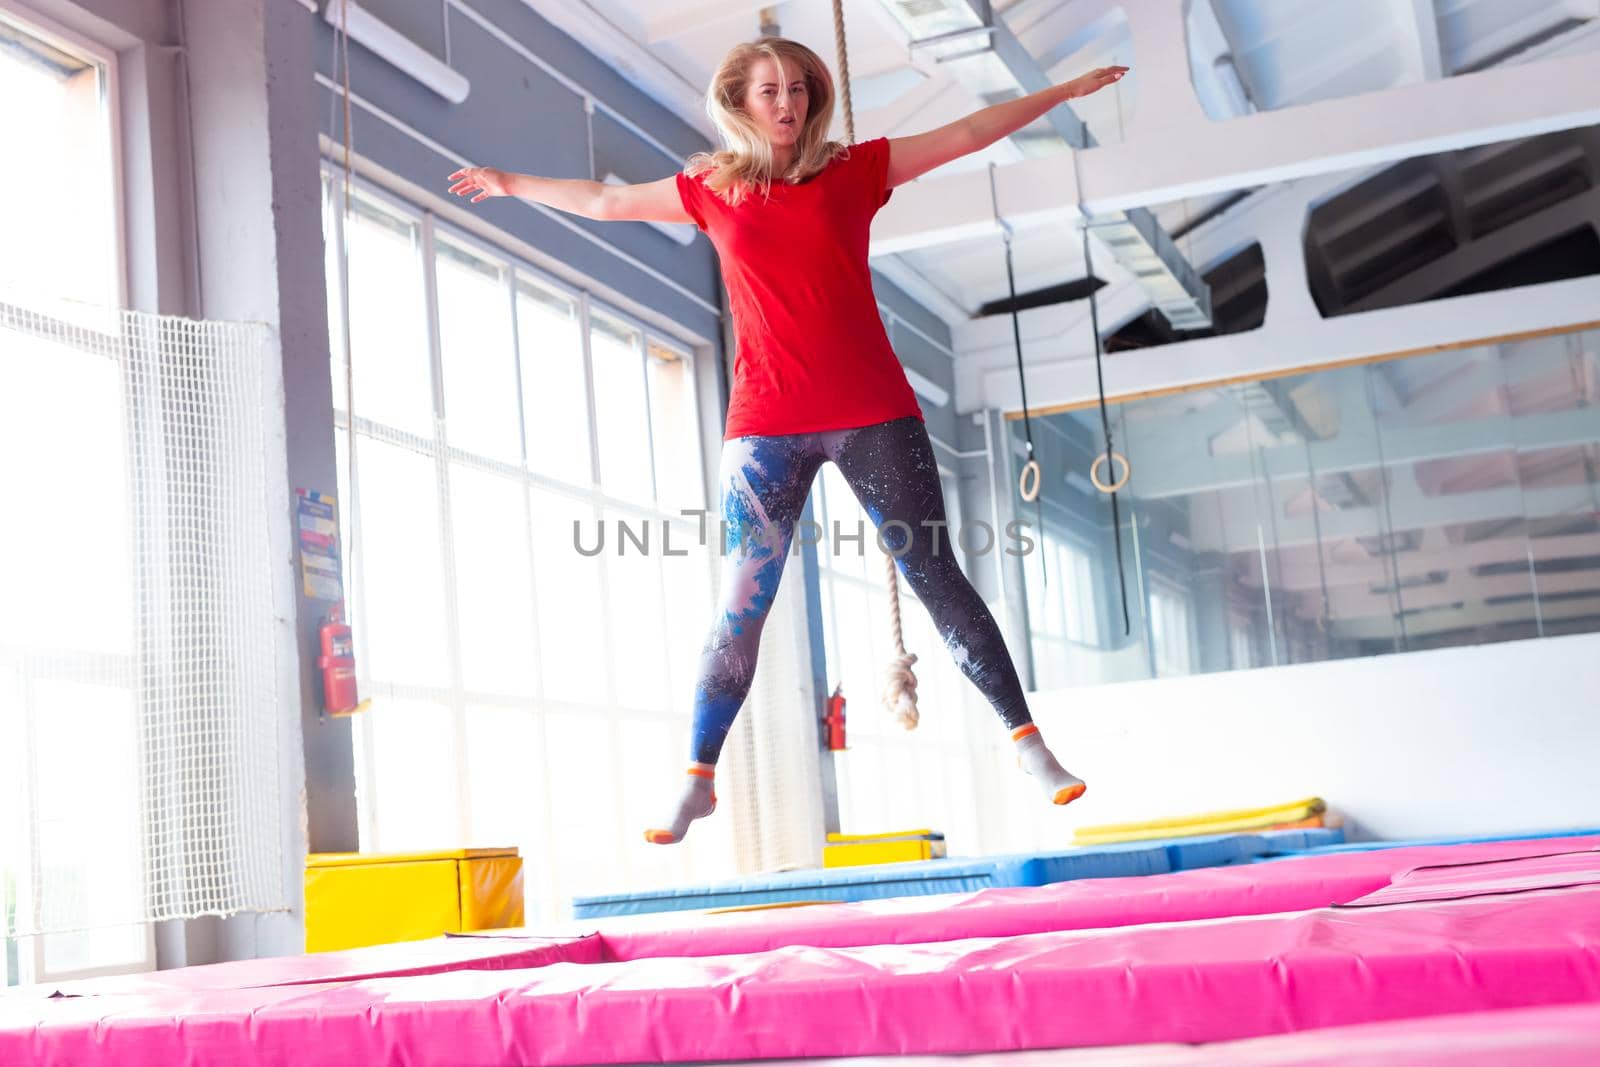 Fitness, fun, leisure and sport activity concept - Young happy woman jumping on a trampoline indoors.